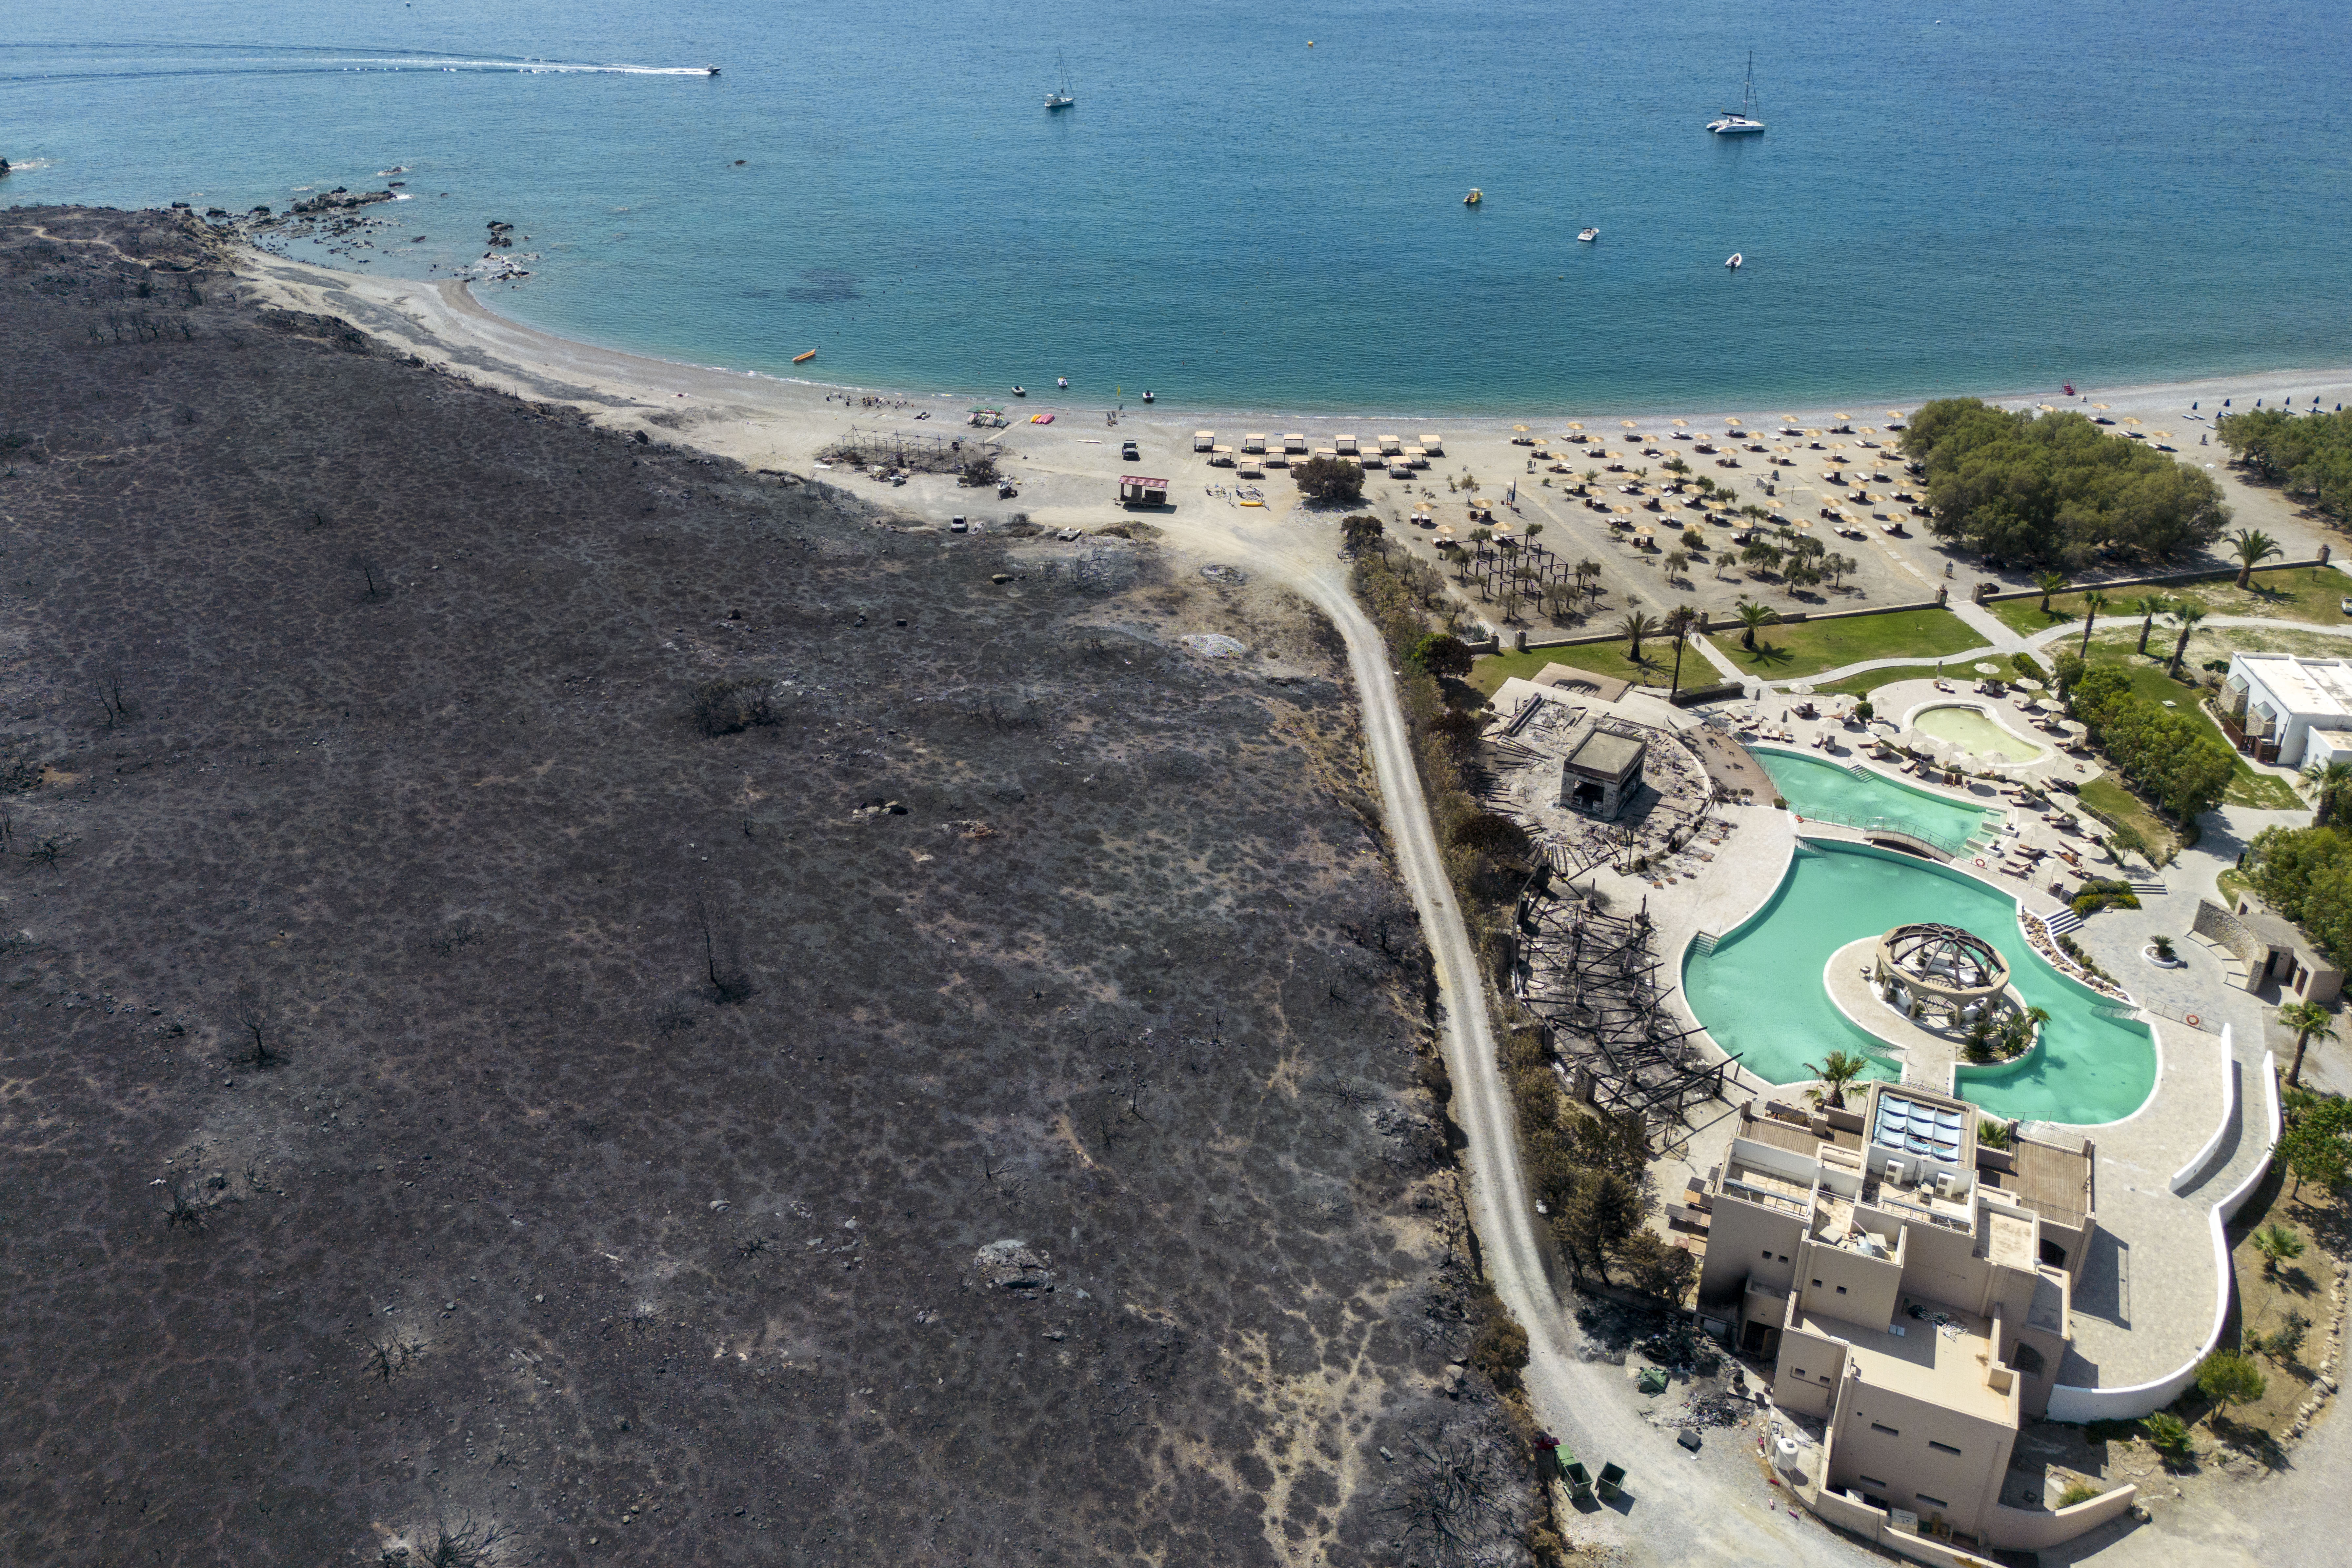 Wildfires have scorched the ground in the resort village of Kotari in Greece